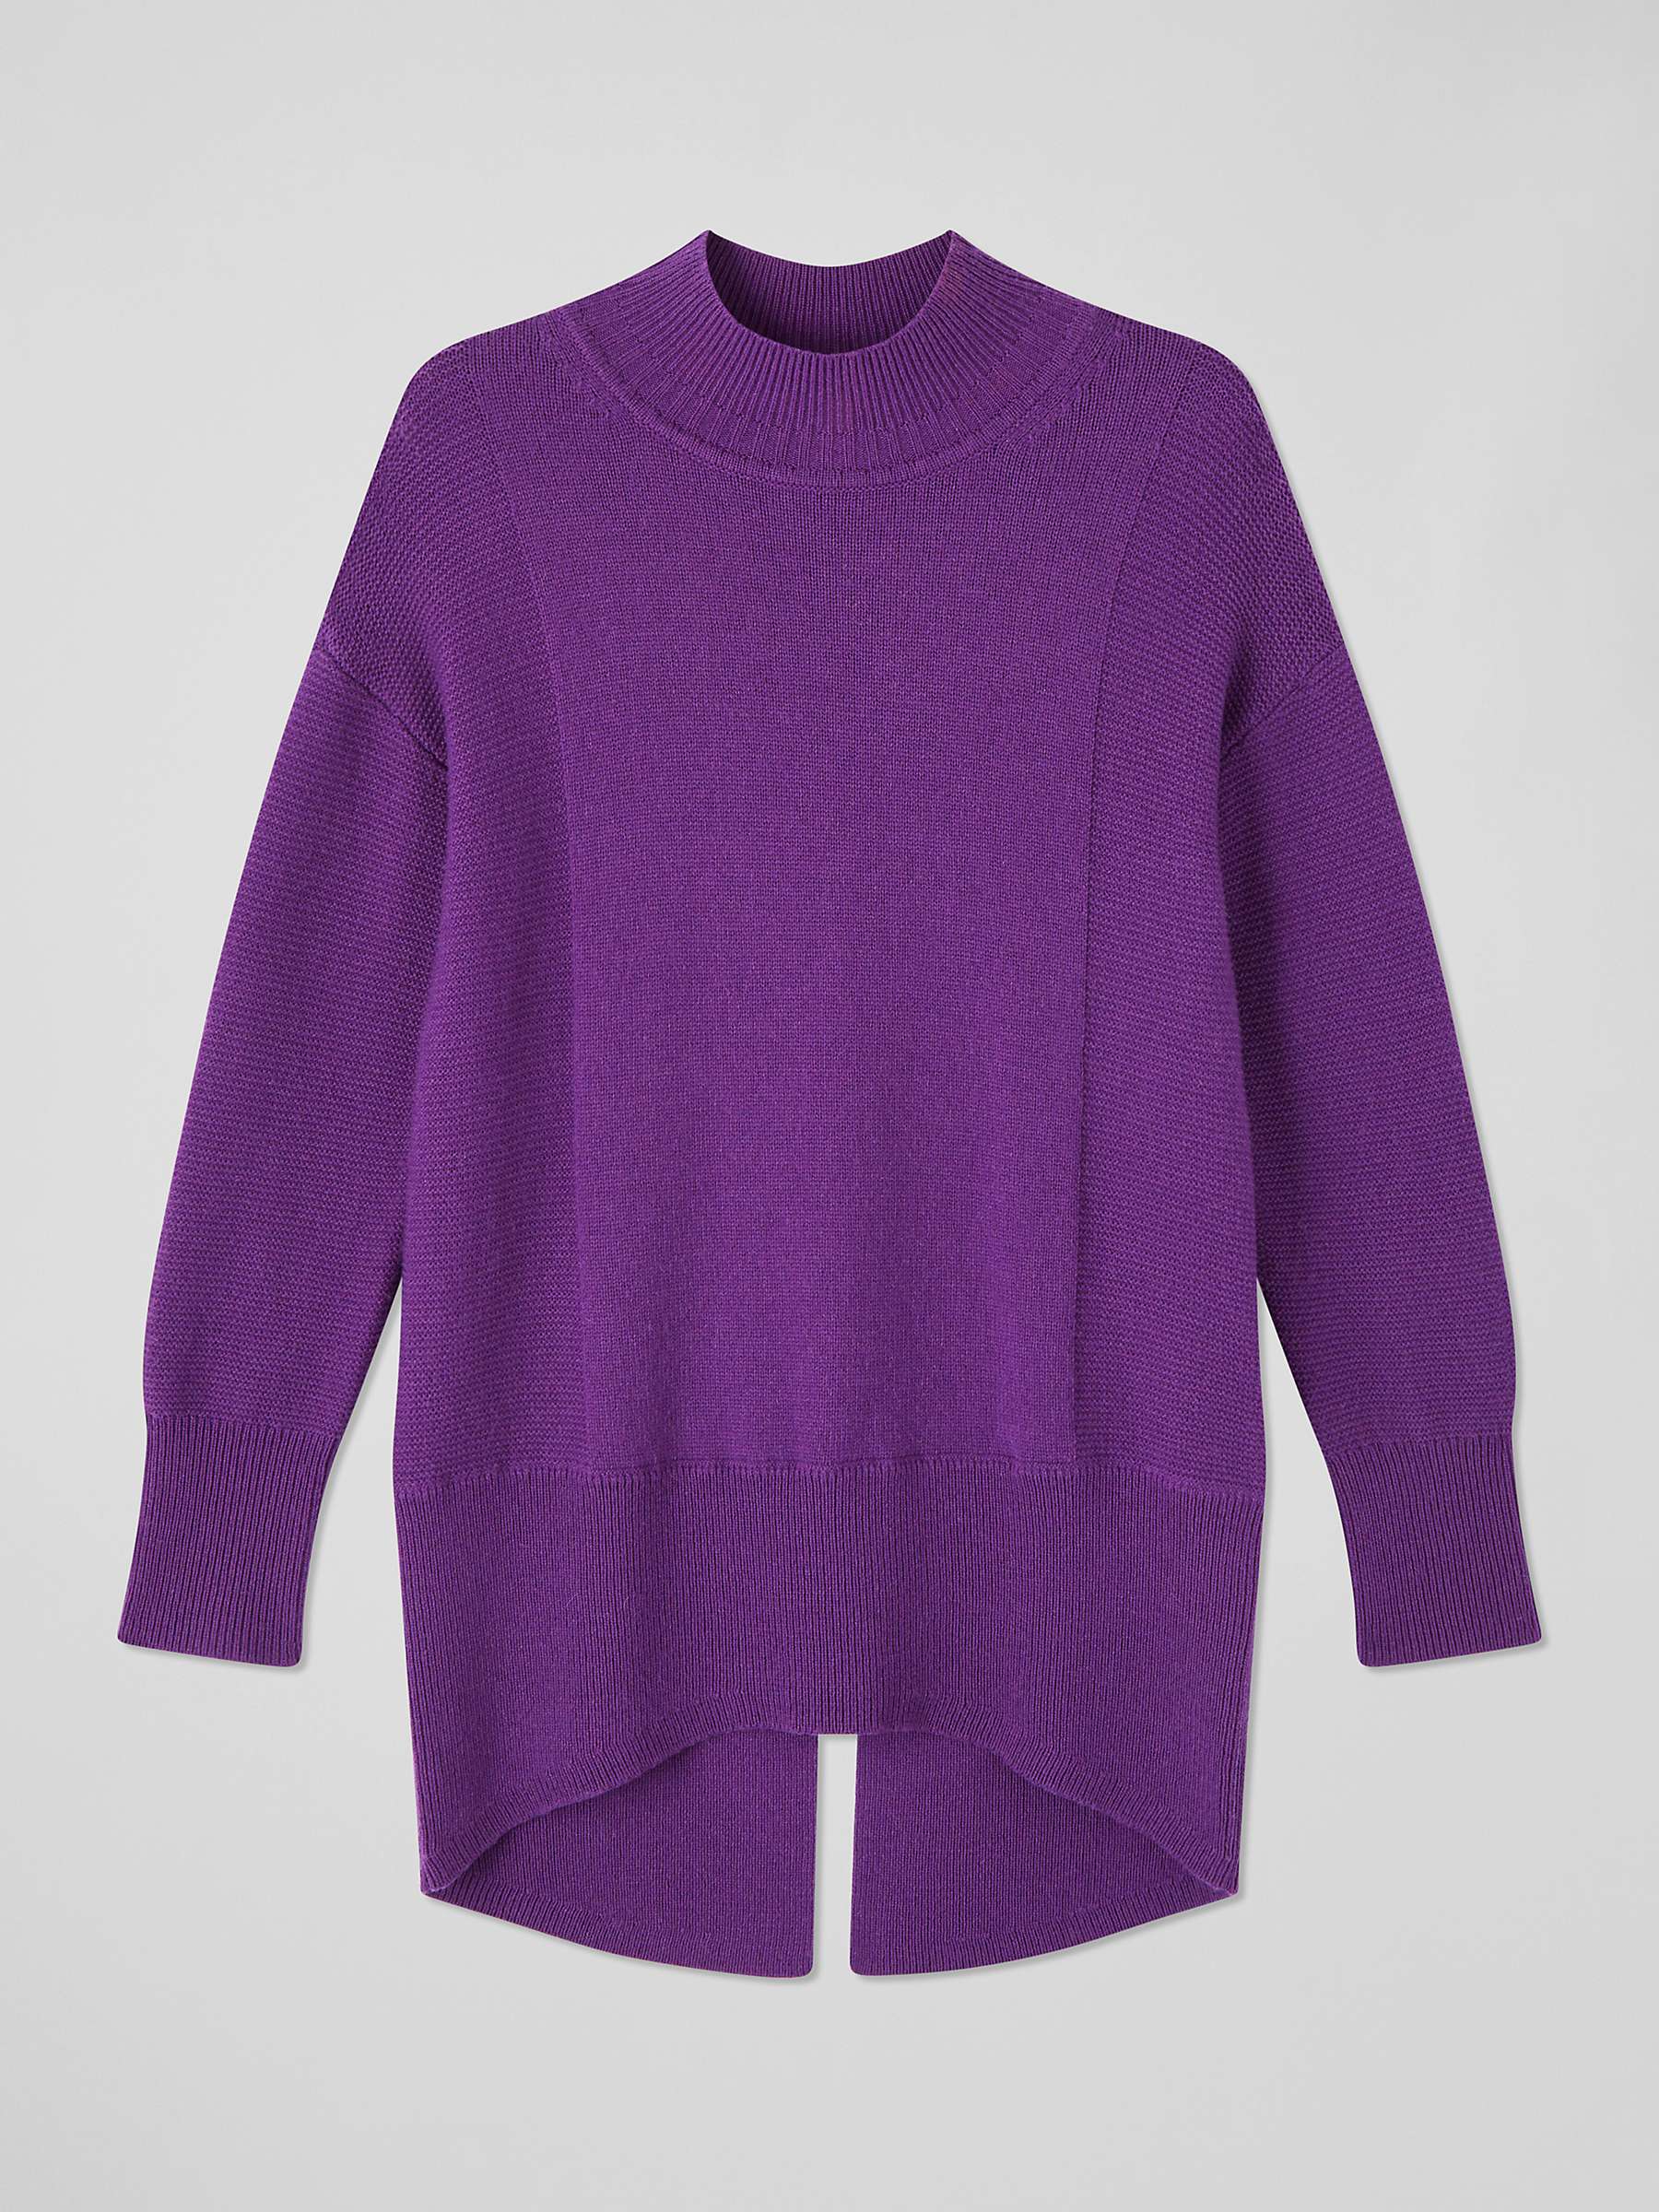 Buy L.K.Bennett Milly Wool Mix Knitted Jumper, Pure Deep Purple Online at johnlewis.com